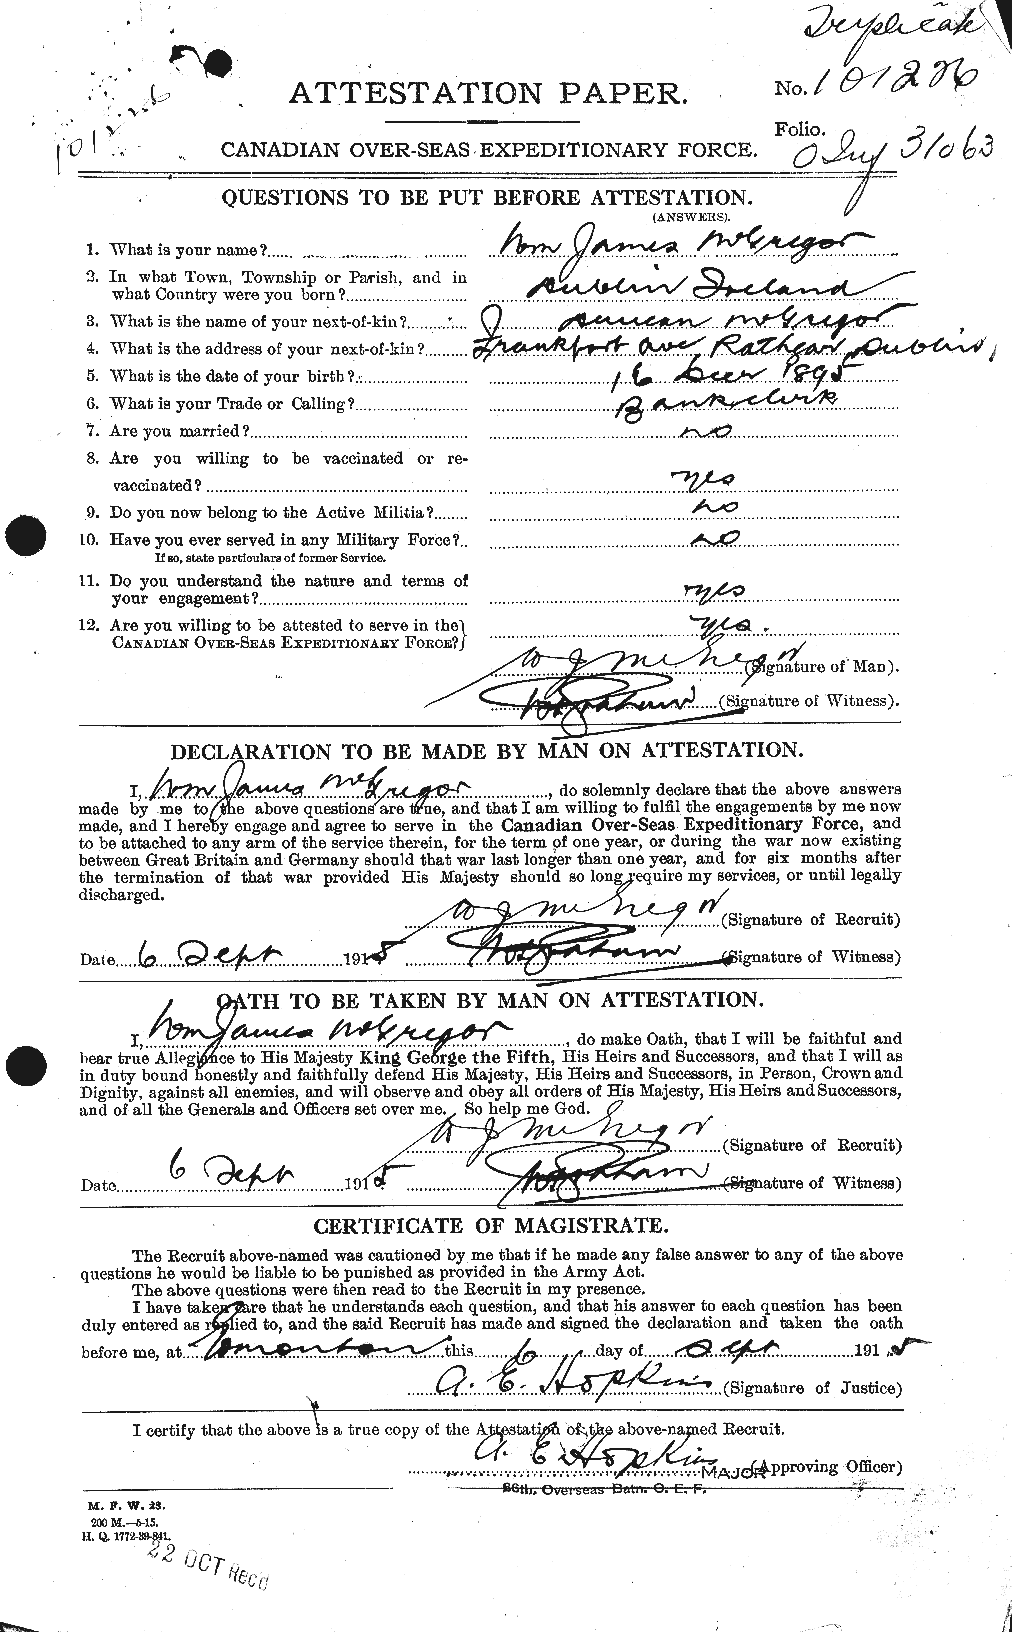 Personnel Records of the First World War - CEF 527994a